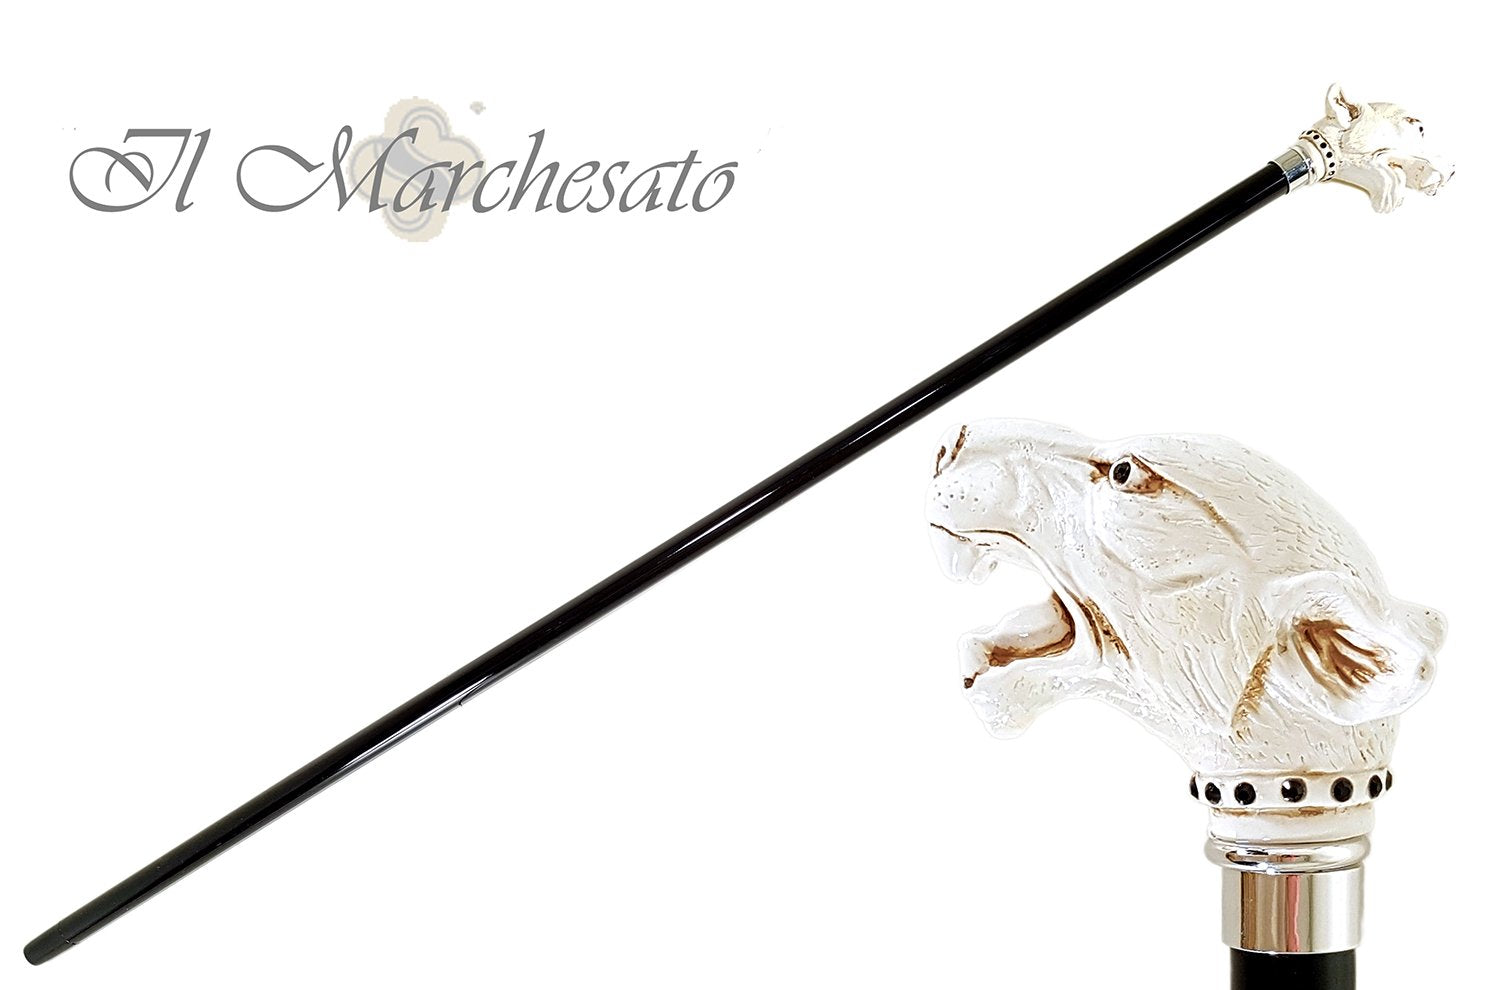 Walking Stick cane Lacquered in an Ivory Color - il-marchesato